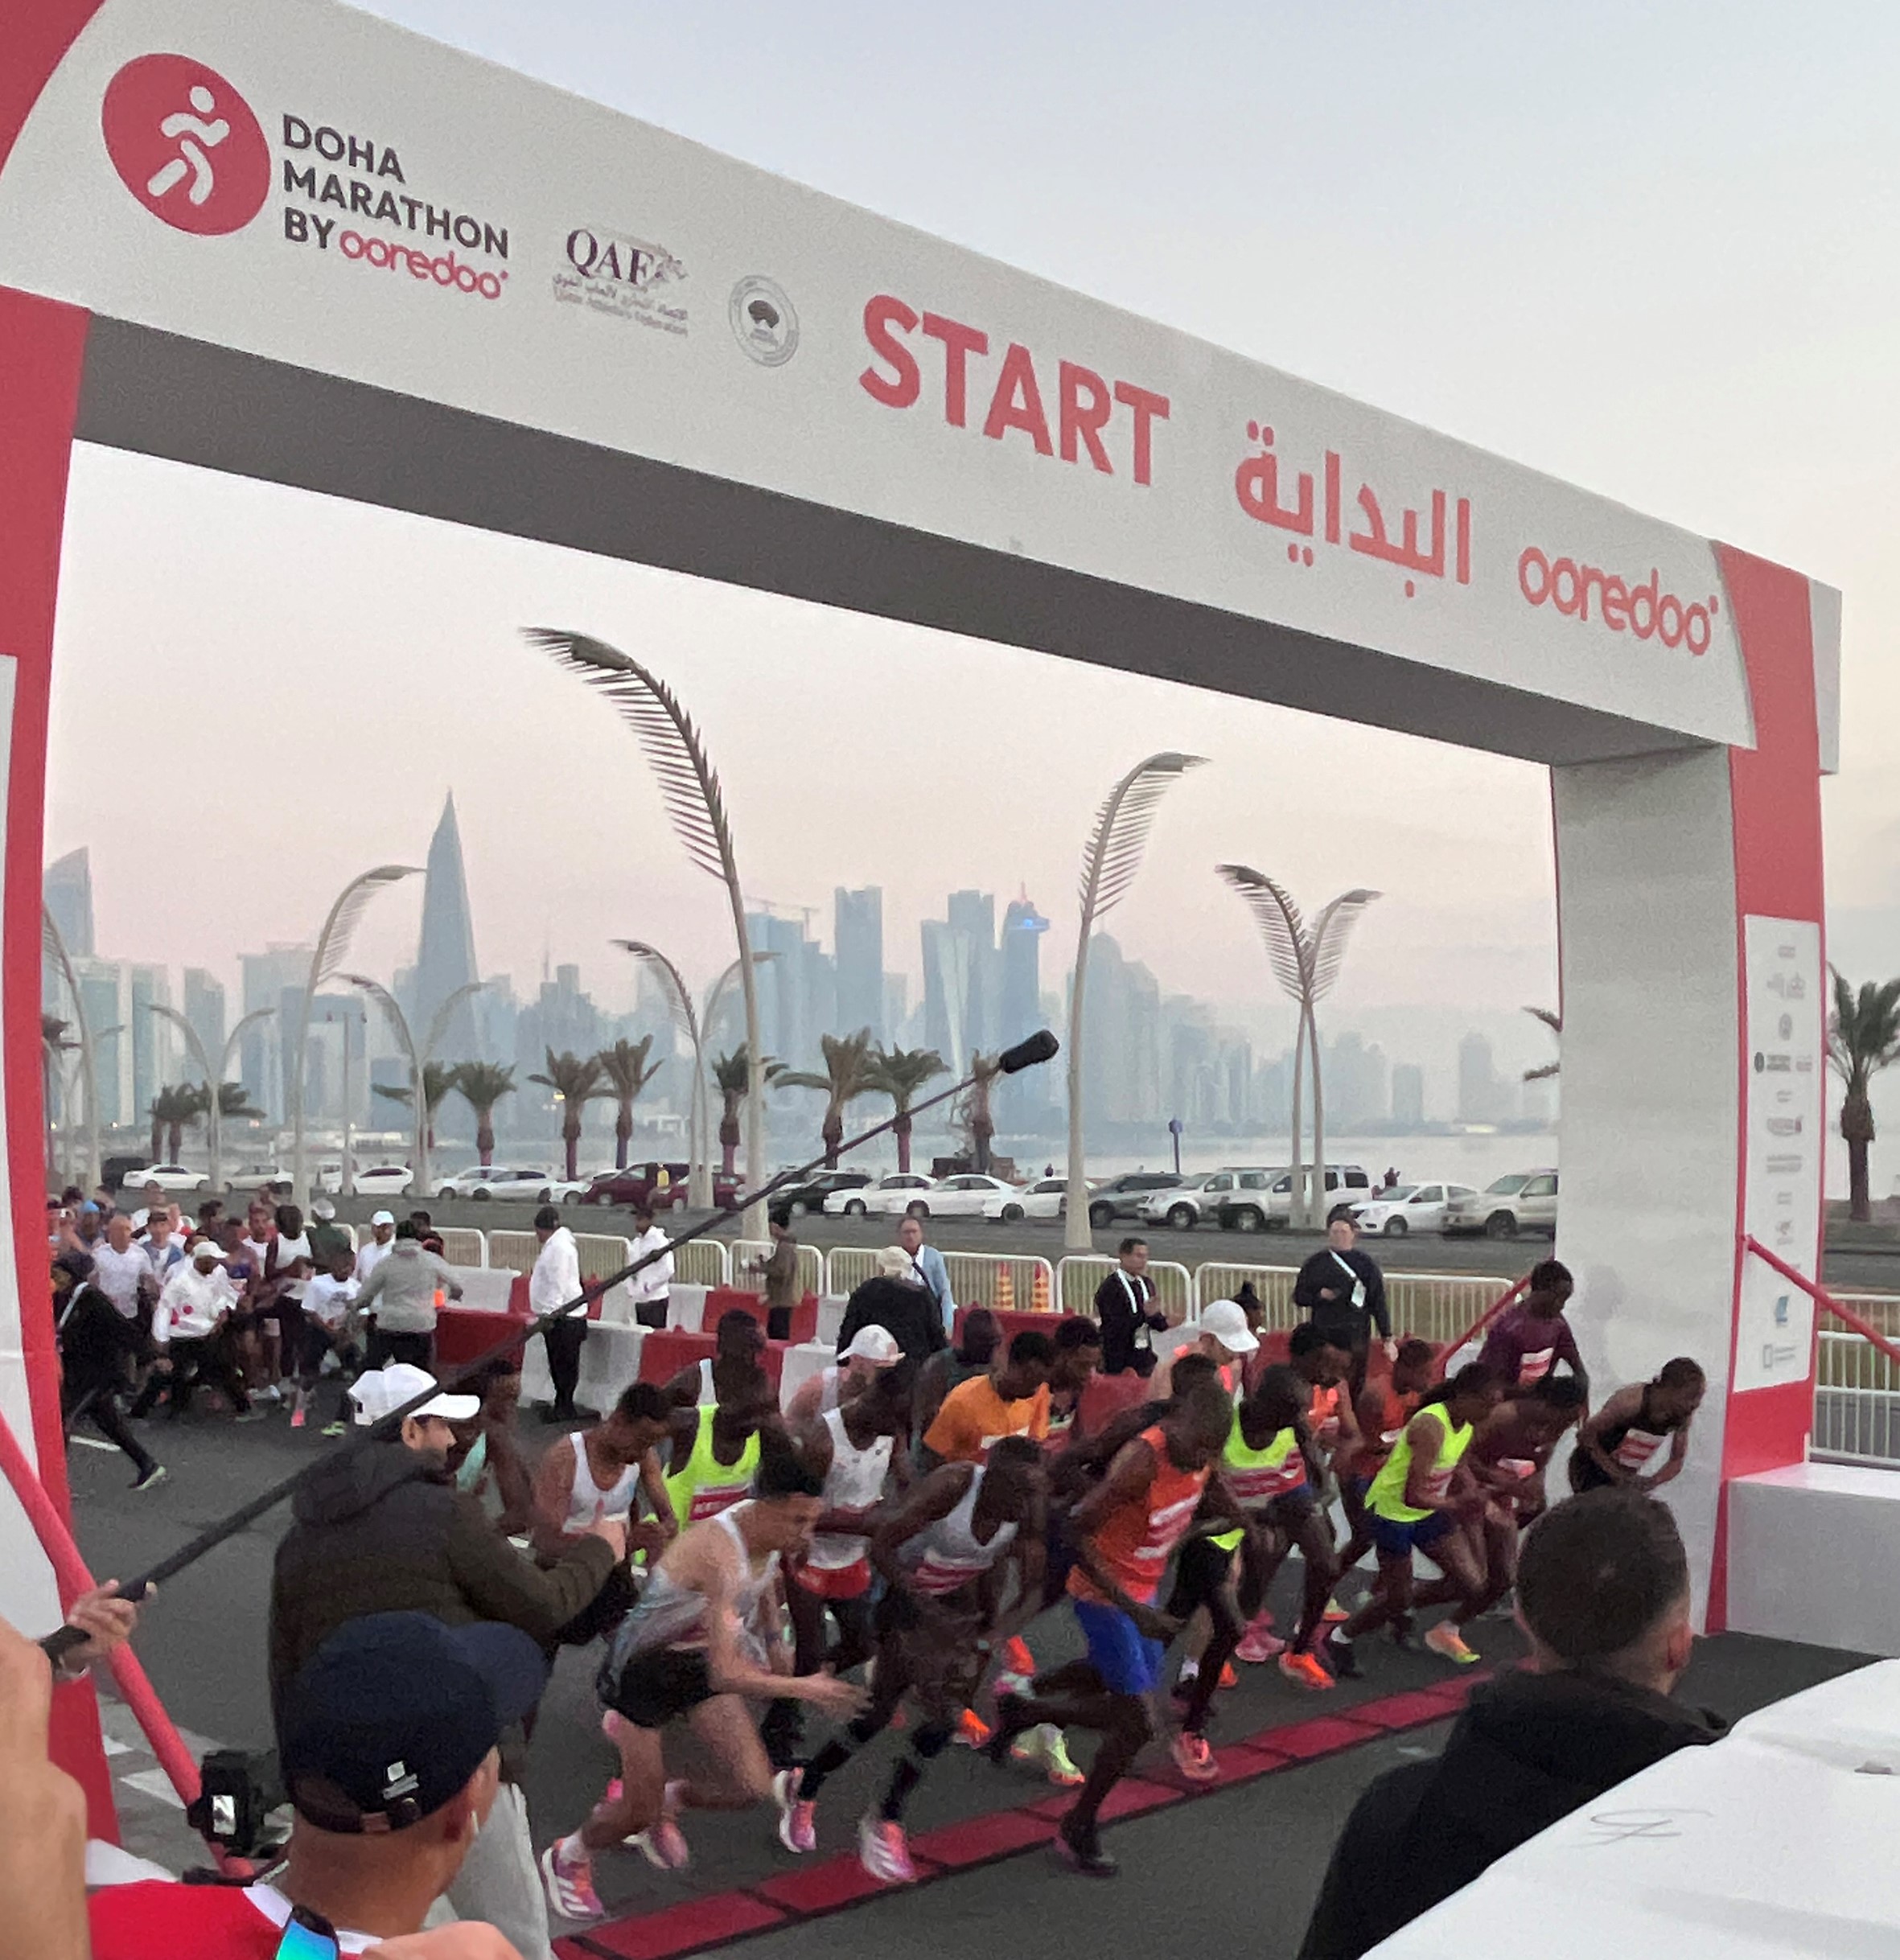 Image shows runners at the start line of a marathon race in Qatar.